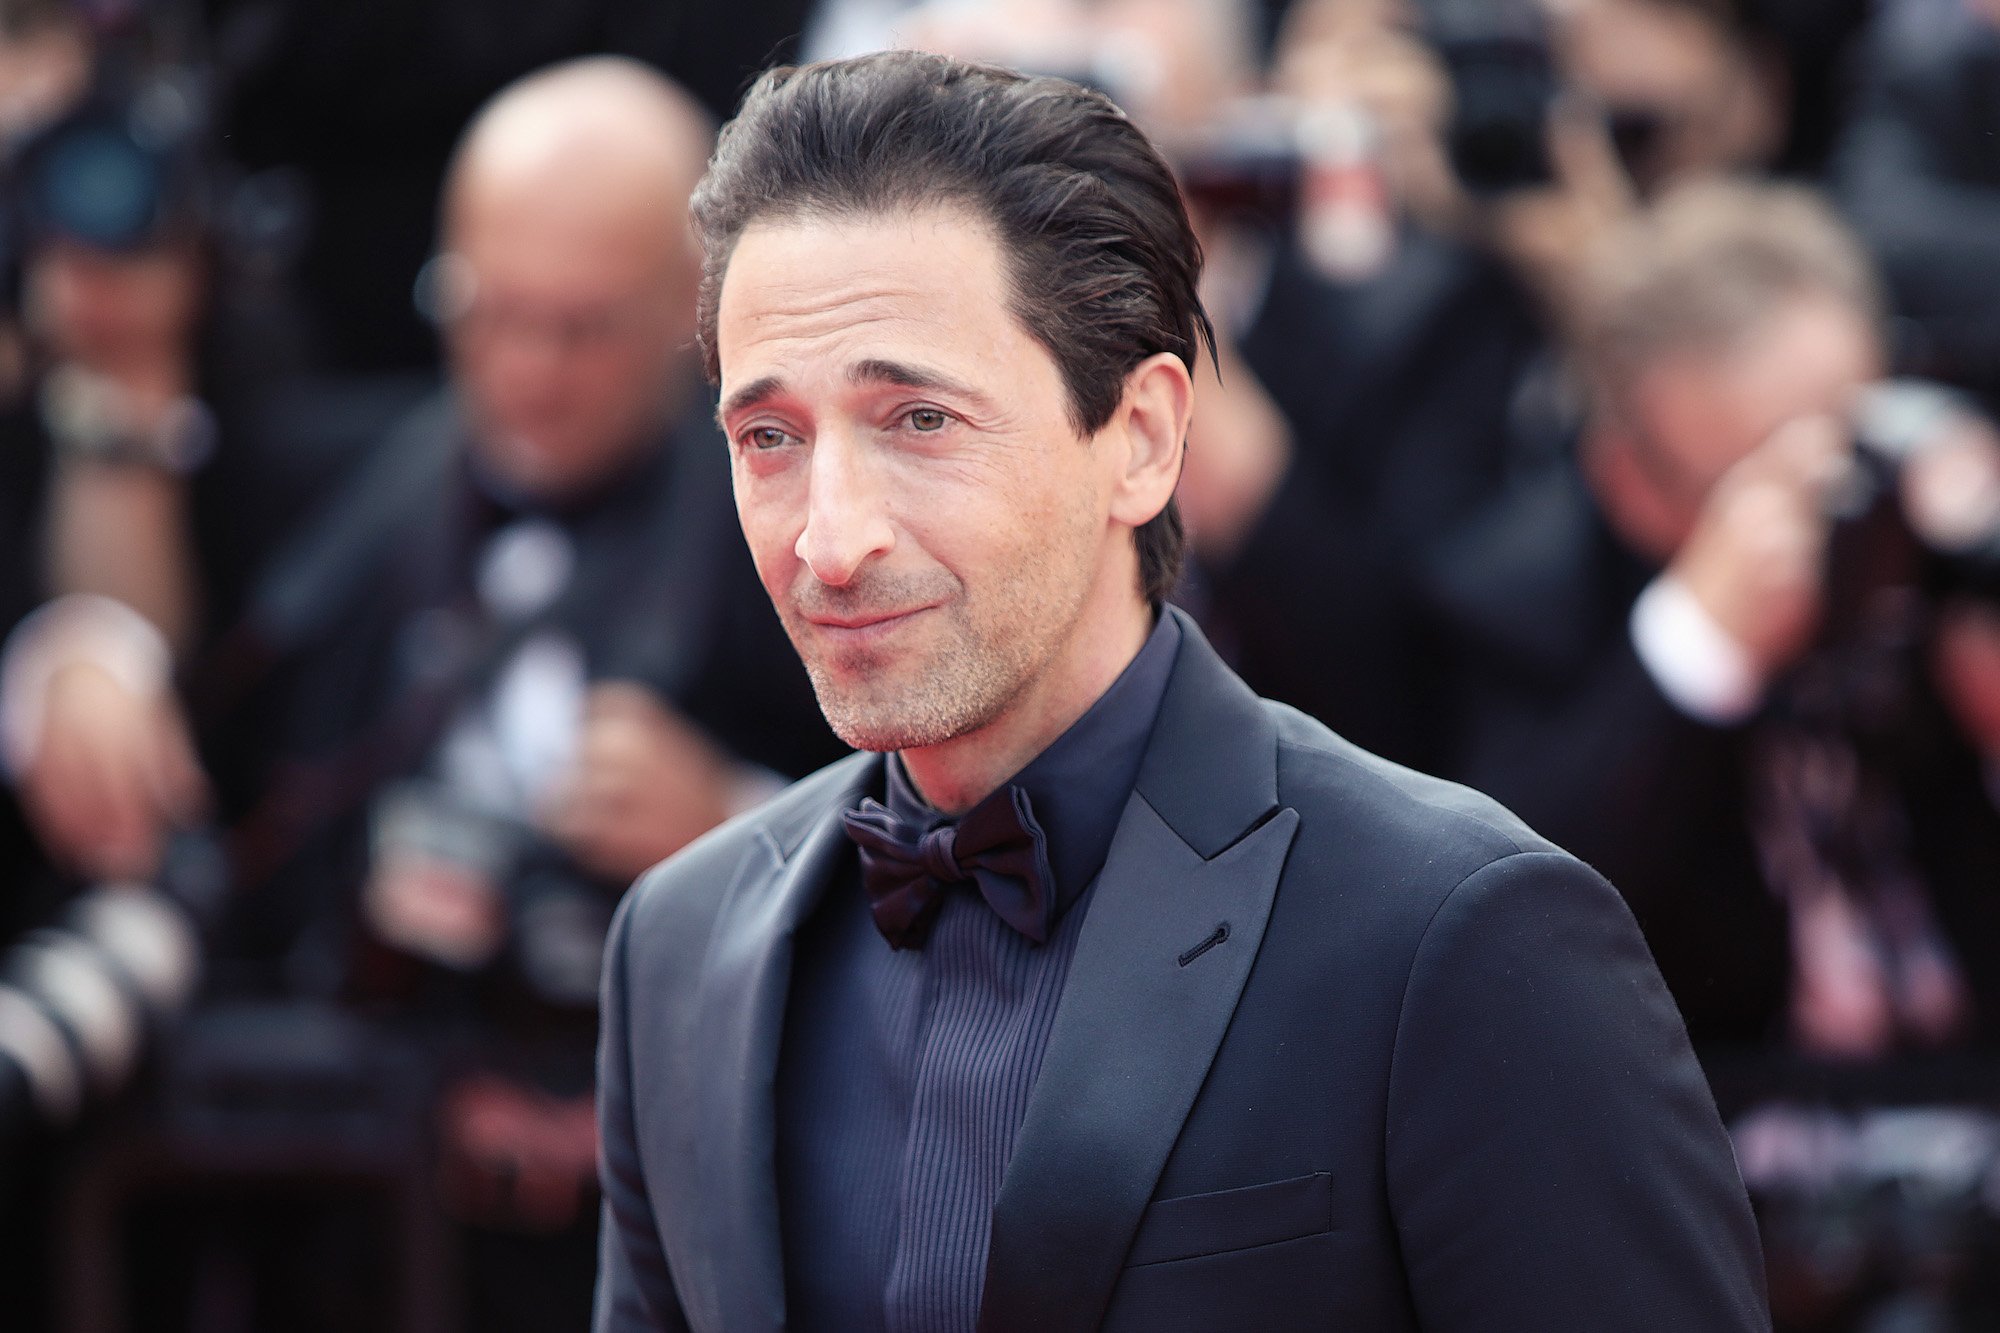 Adrien Brody Was Shocked His Demotion in Thin Red 'It Was Extremely Unpleasant'